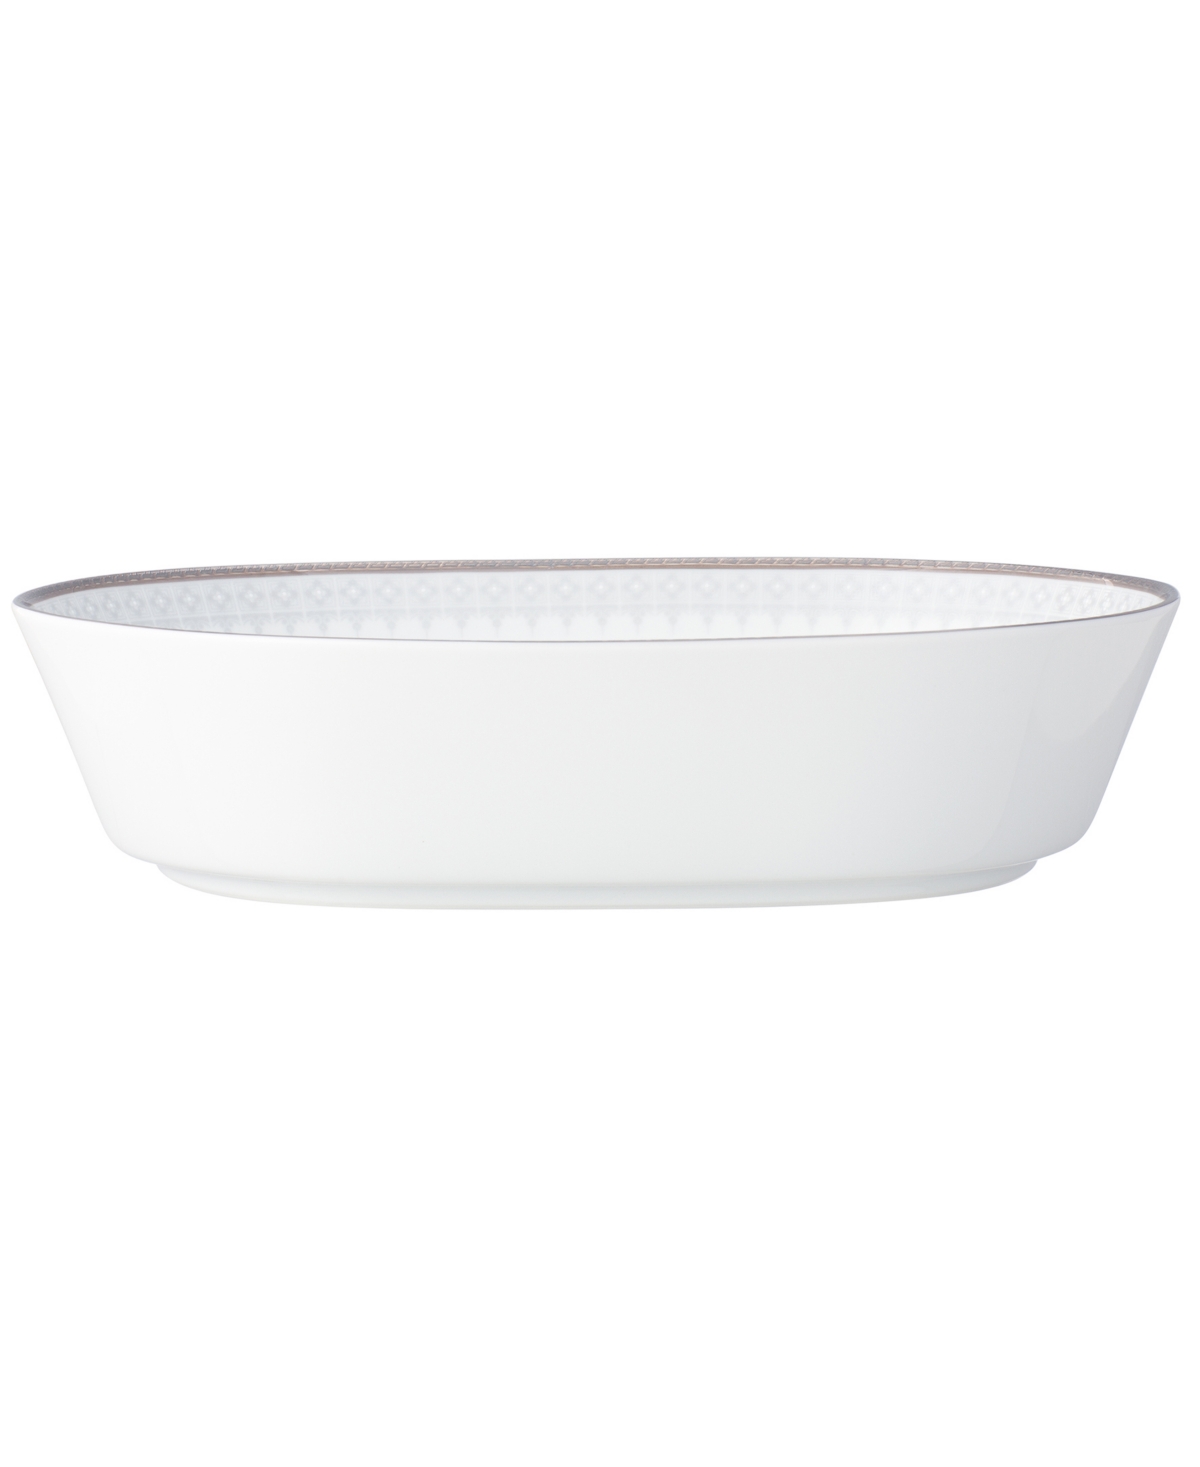 Noritake Silver Colonnade Oval Vegetable Bowl In White